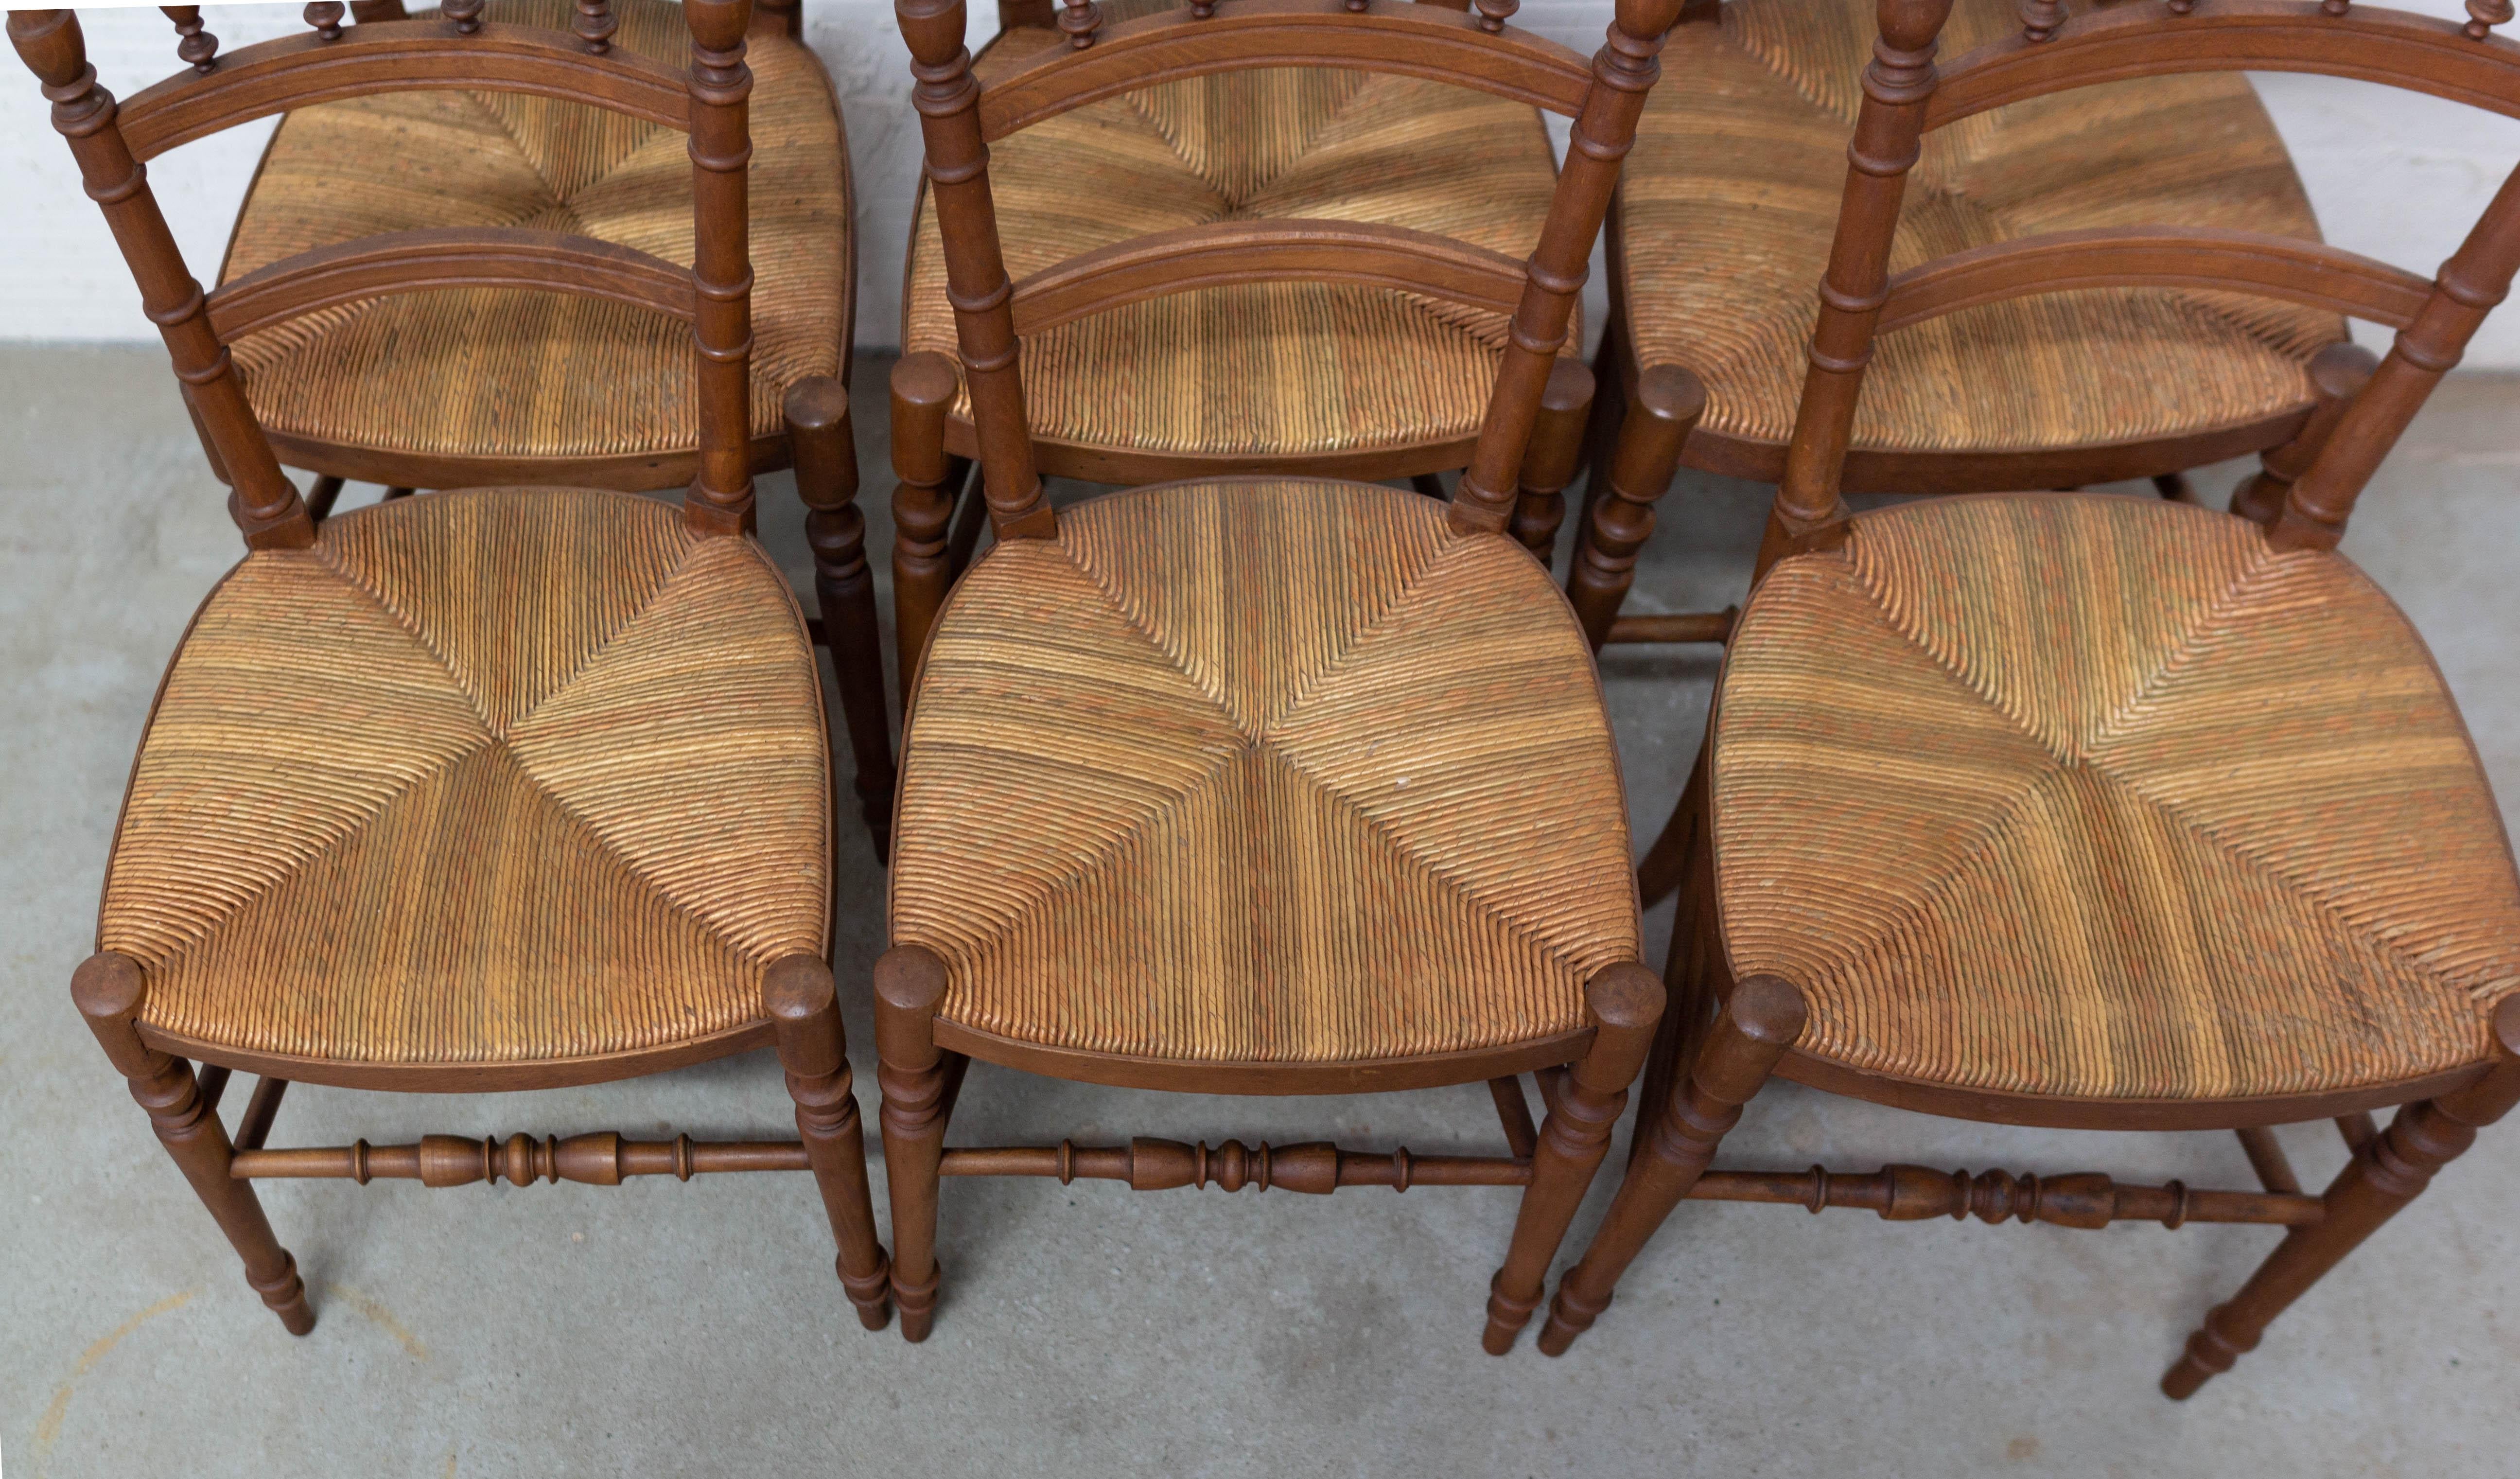 Napoleon III Six Dining Chairs French Rush Seats and Baluster Backs, Late 19th Century